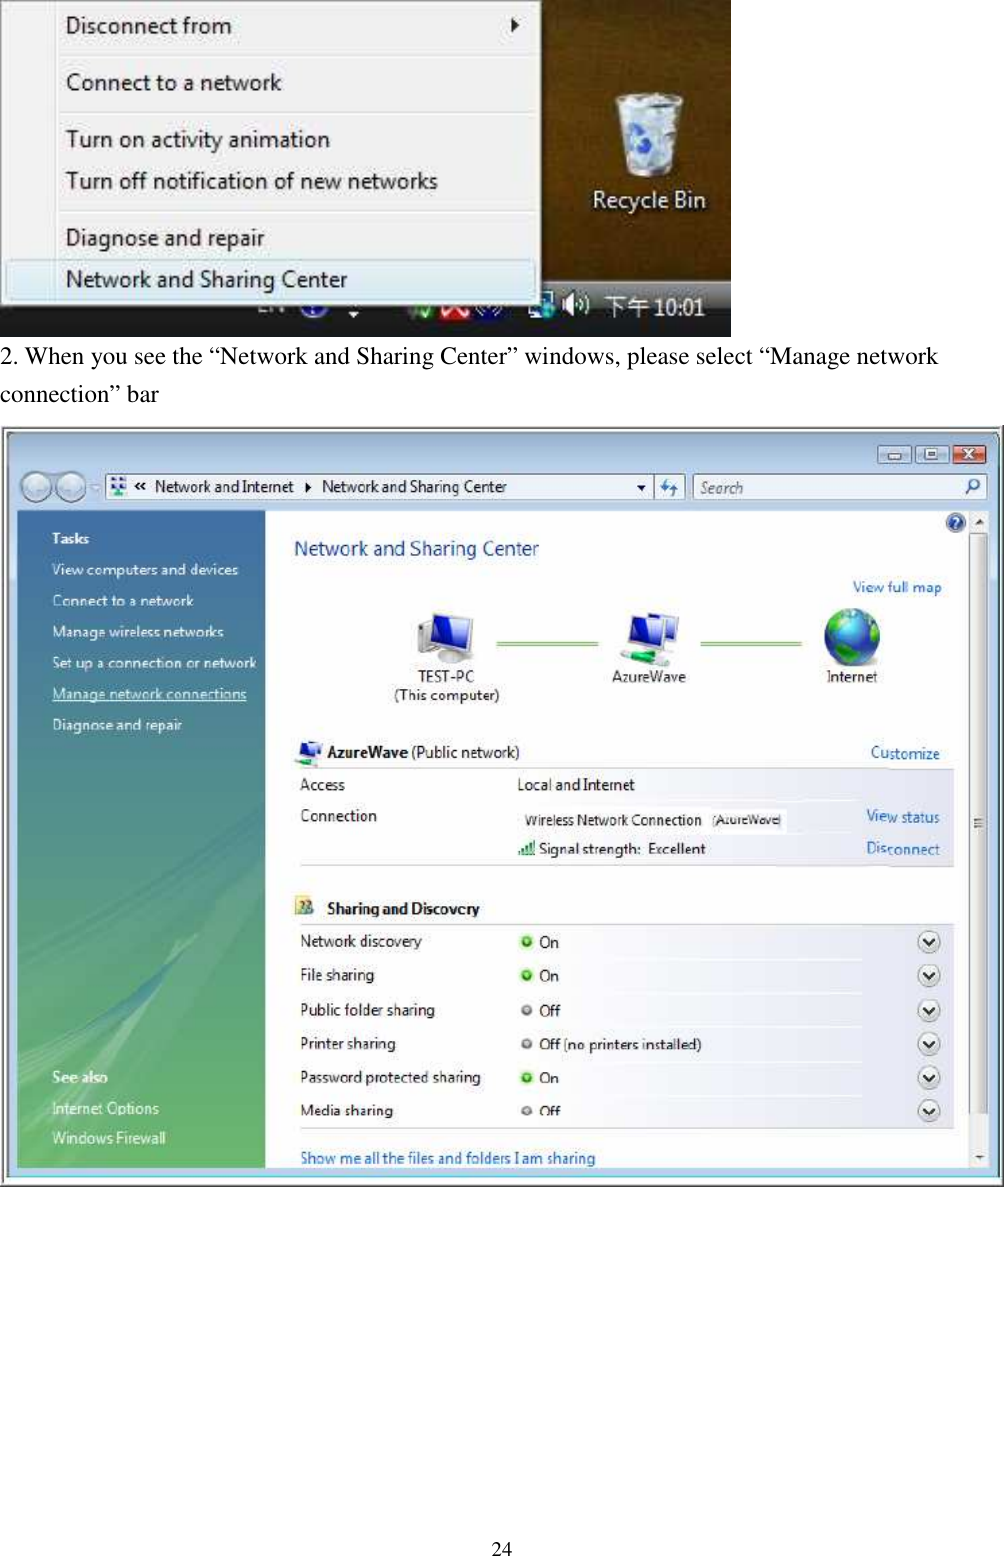   24 2. When you see the “Network and Sharing Center” windows, please select “Manage network connection” bar           